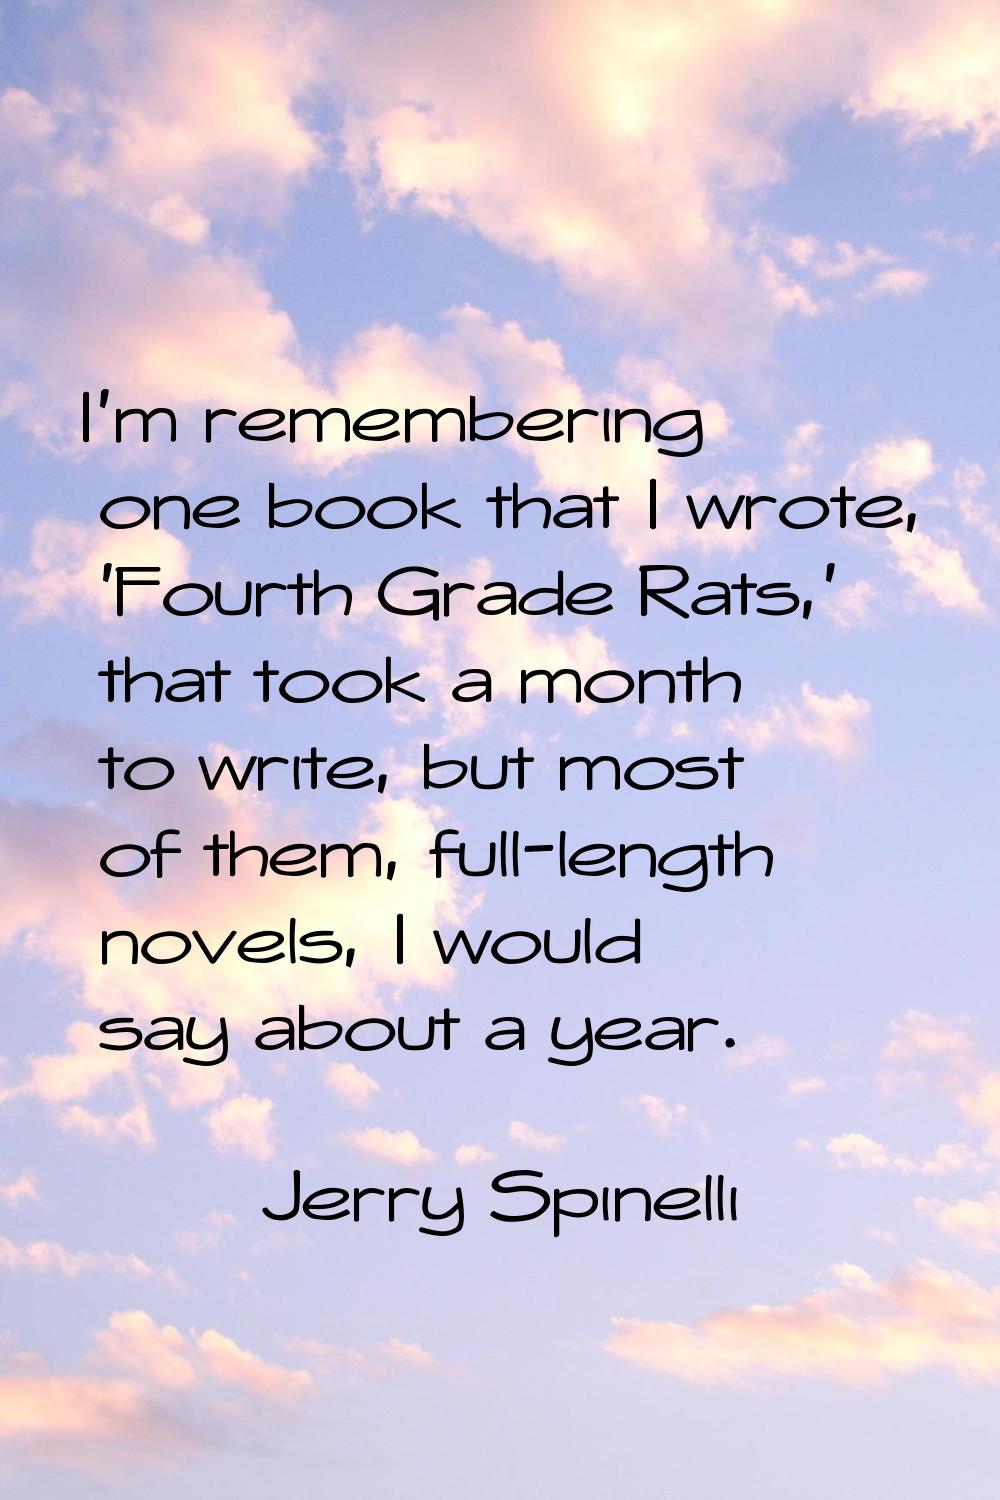 I'm remembering one book that I wrote, 'Fourth Grade Rats,' that took a month to write, but most of